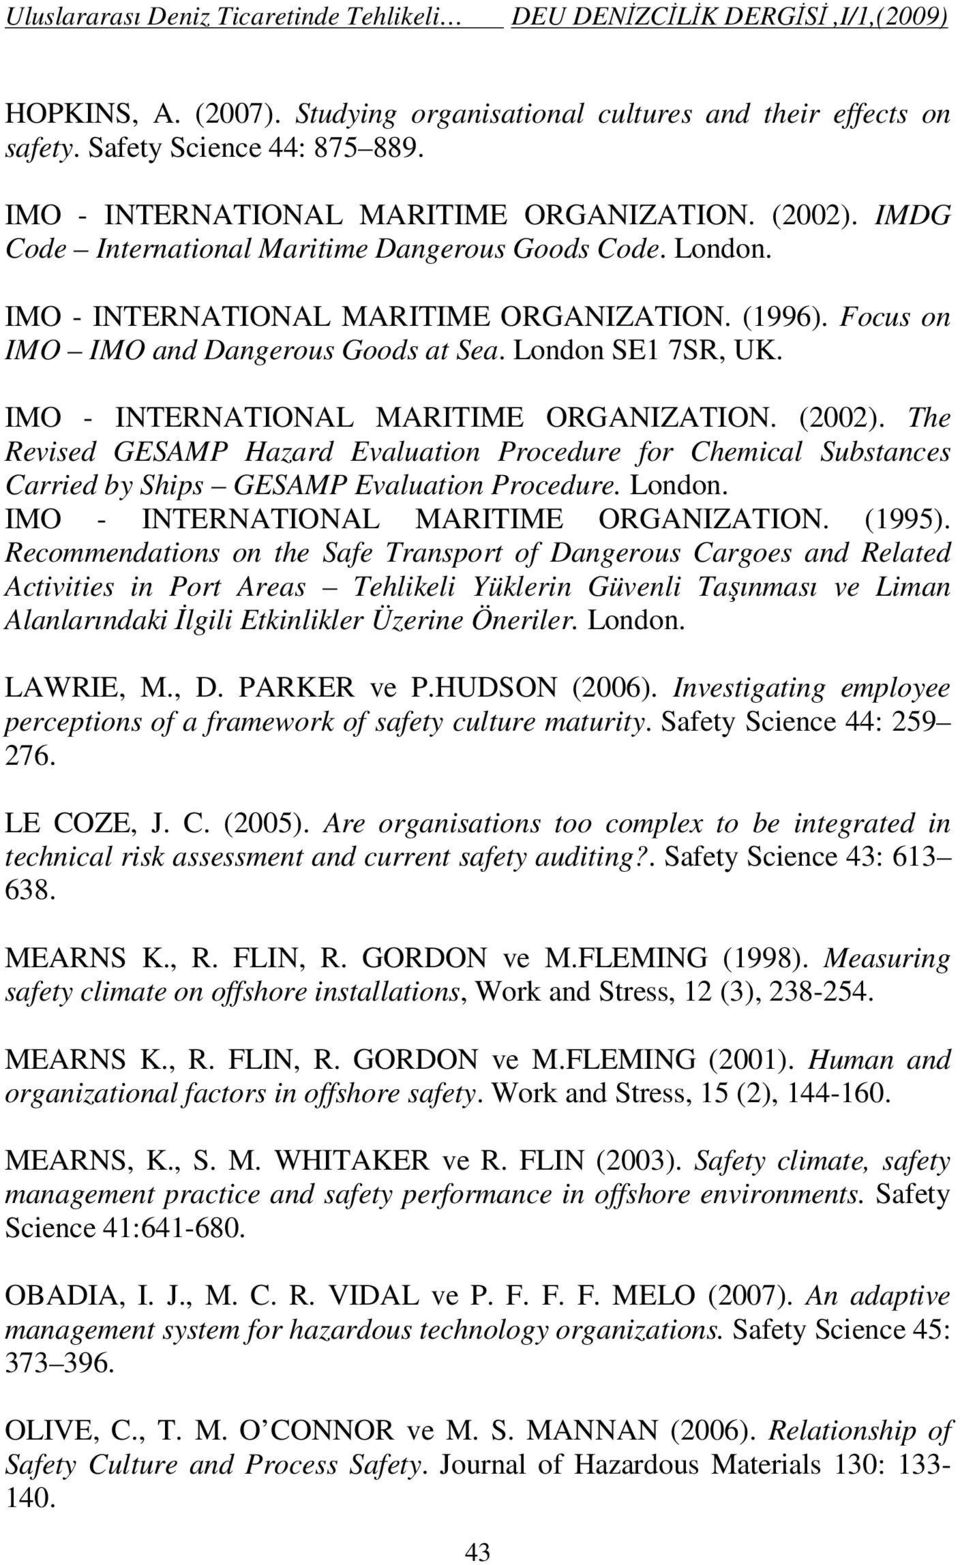 IMO - INTERNATIONAL MARITIME ORGANIZATION. (2002). The Revised GESAMP Hazard Evaluation Procedure for Chemical Substances Carried by Ships GESAMP Evaluation Procedure. London.